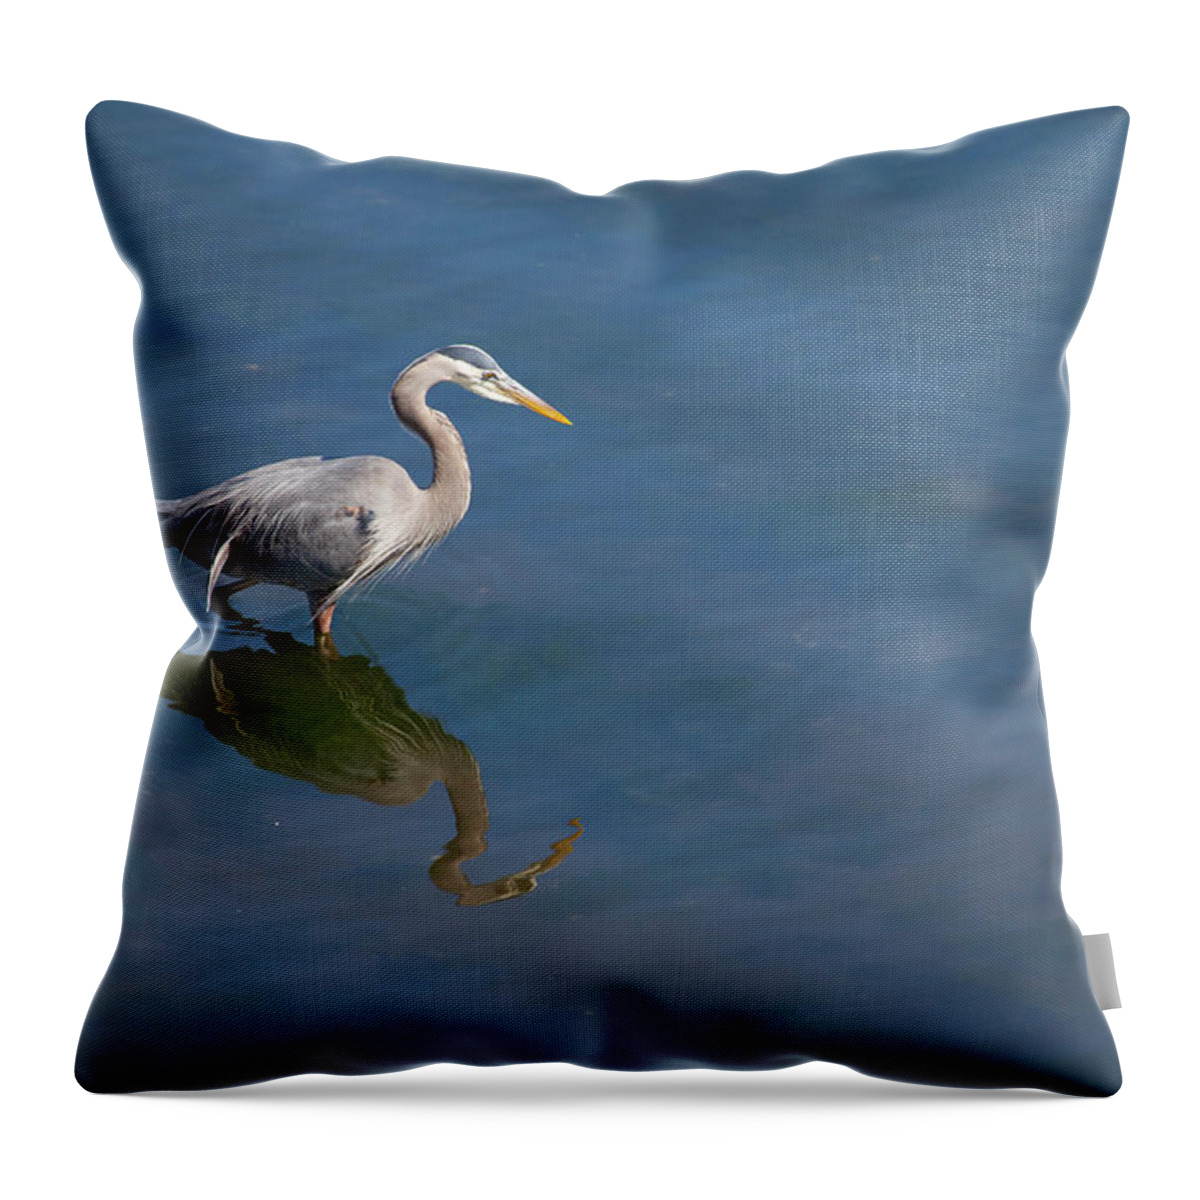 Tranquility Throw Pillow featuring the photograph Great Blue Heron Foraging In The Water by Geostock